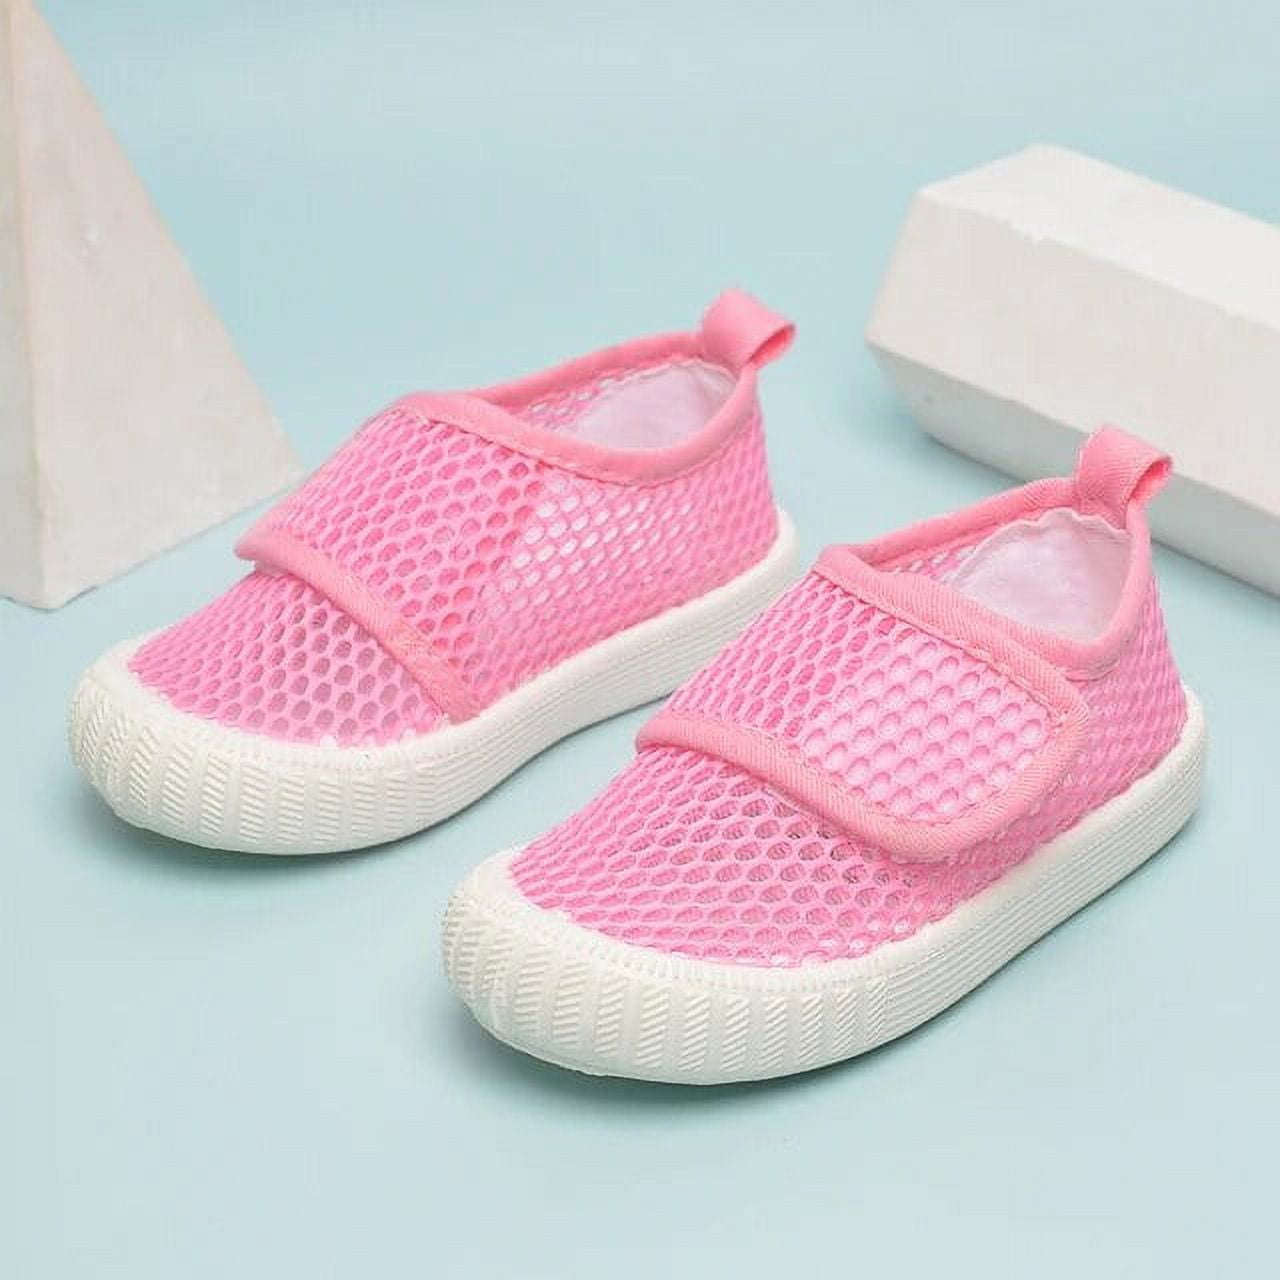 Spring Kids Outdoor Colored Breathable Flat Mesh Sneakers Toddlers ...